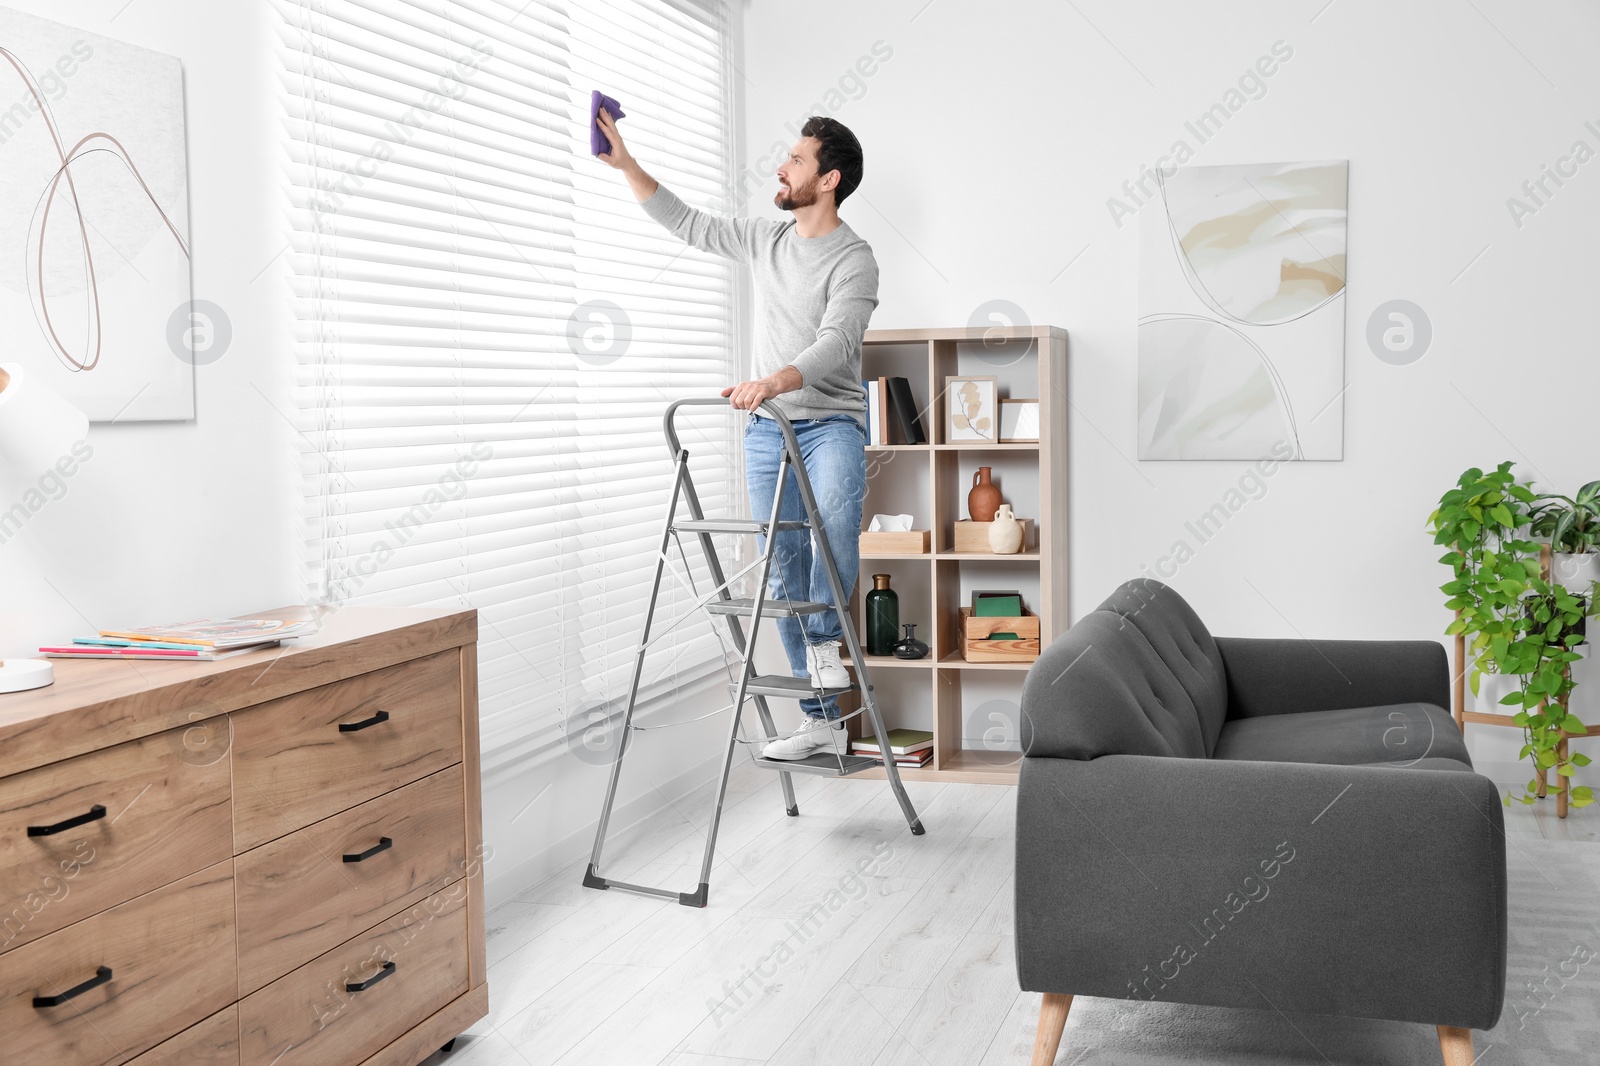 Photo of Man on metal ladder wiping blinds at home